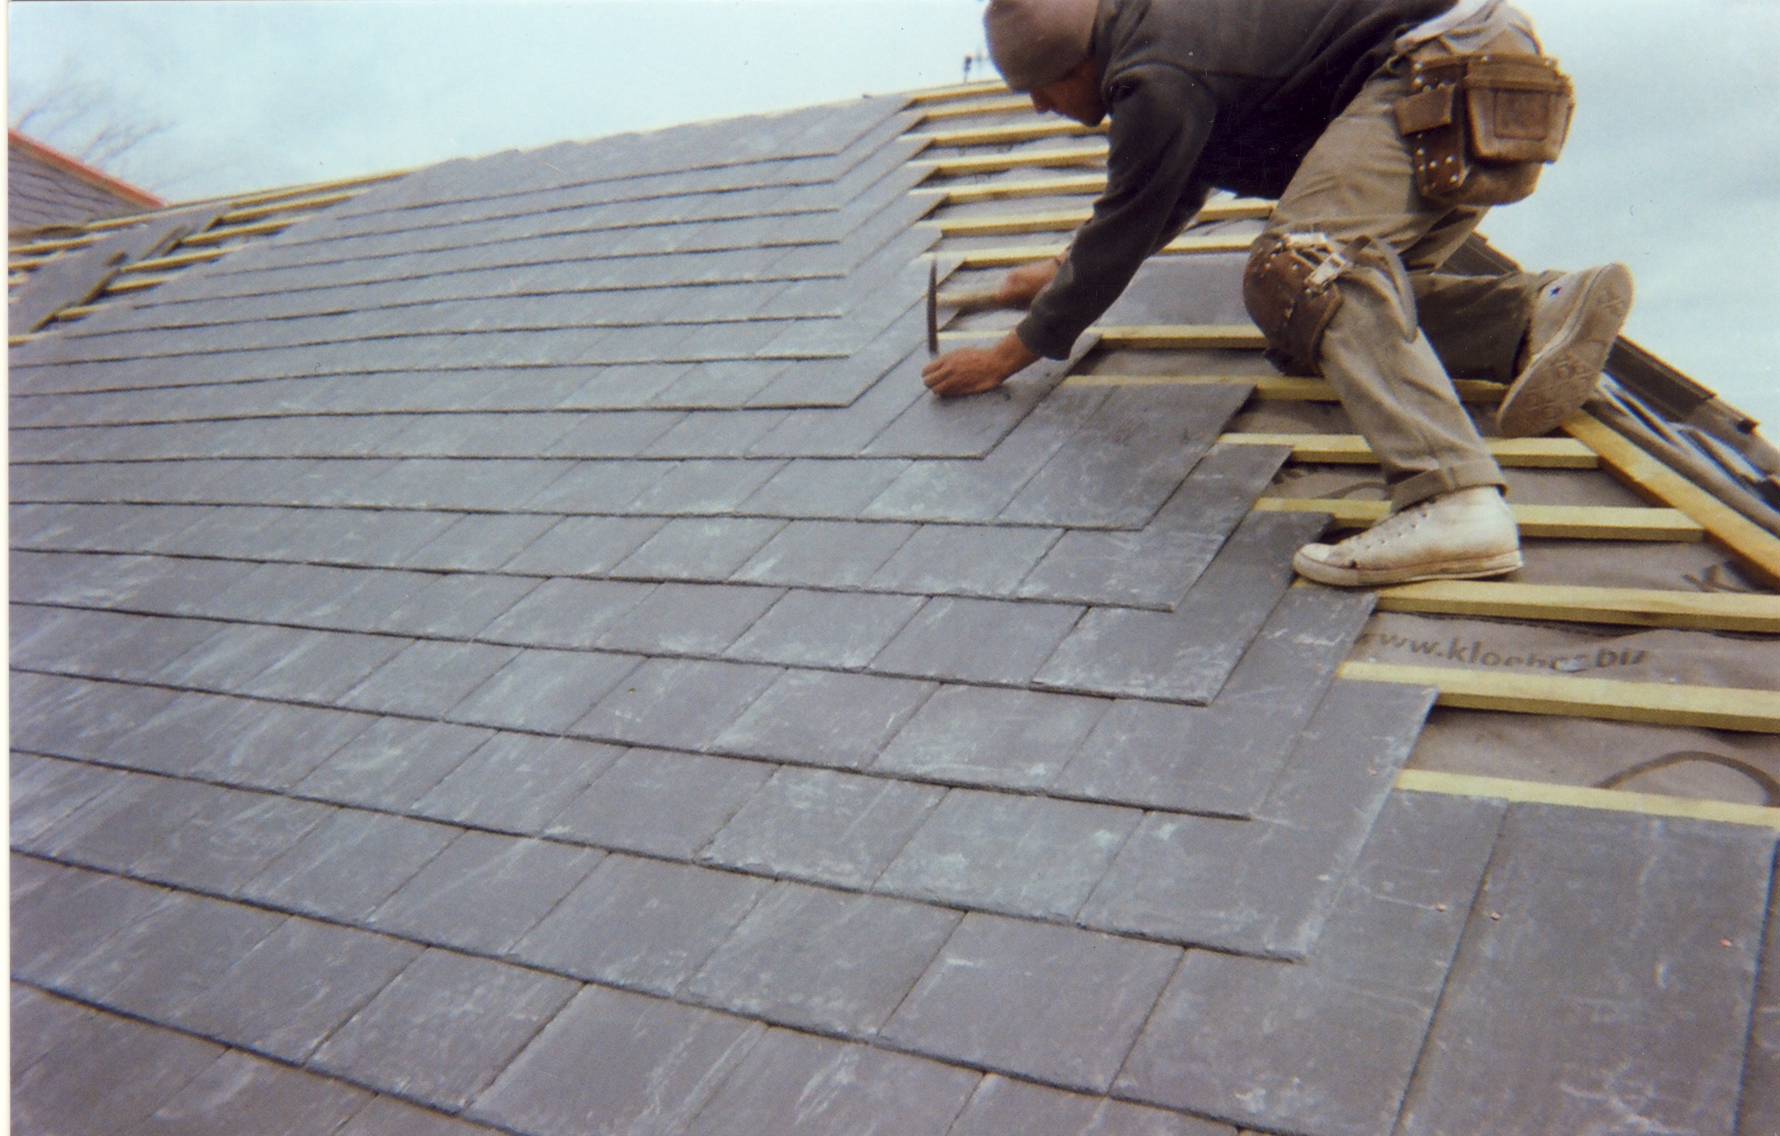 Why You Should Check a Roofing Contractor's Credential